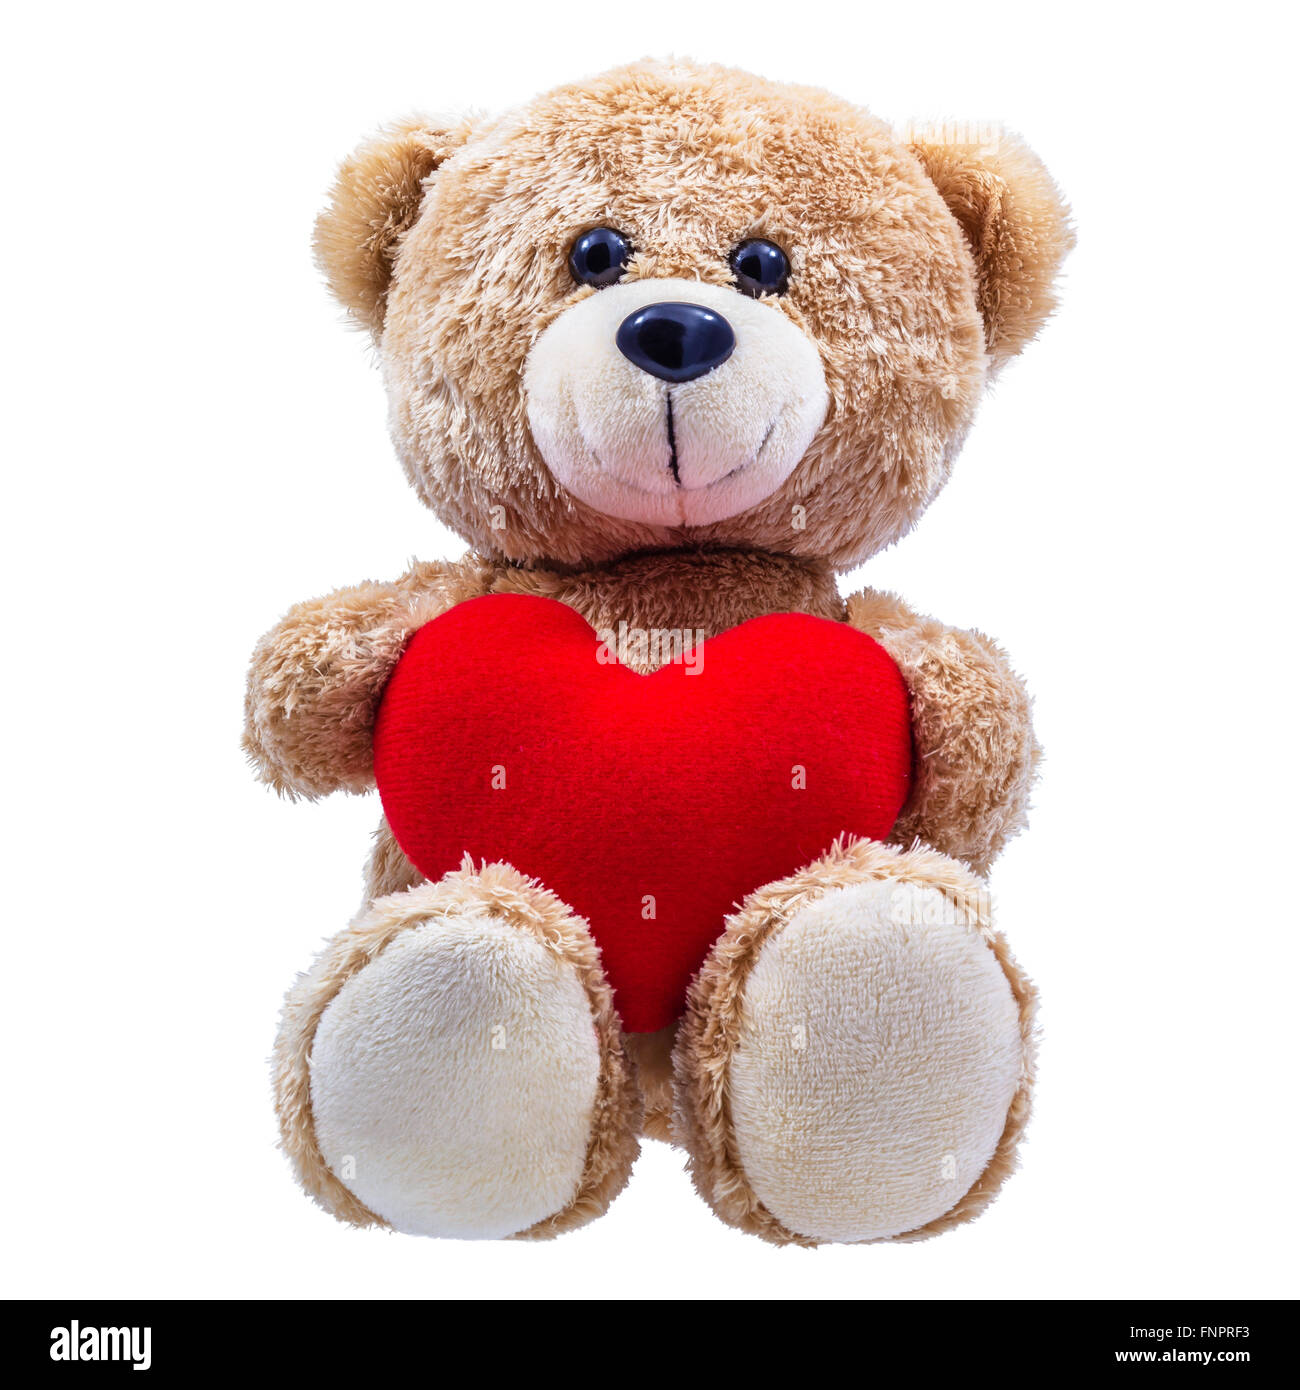 Teddy bear with Red heart-shaped pillow on isolate white background Stock Photo